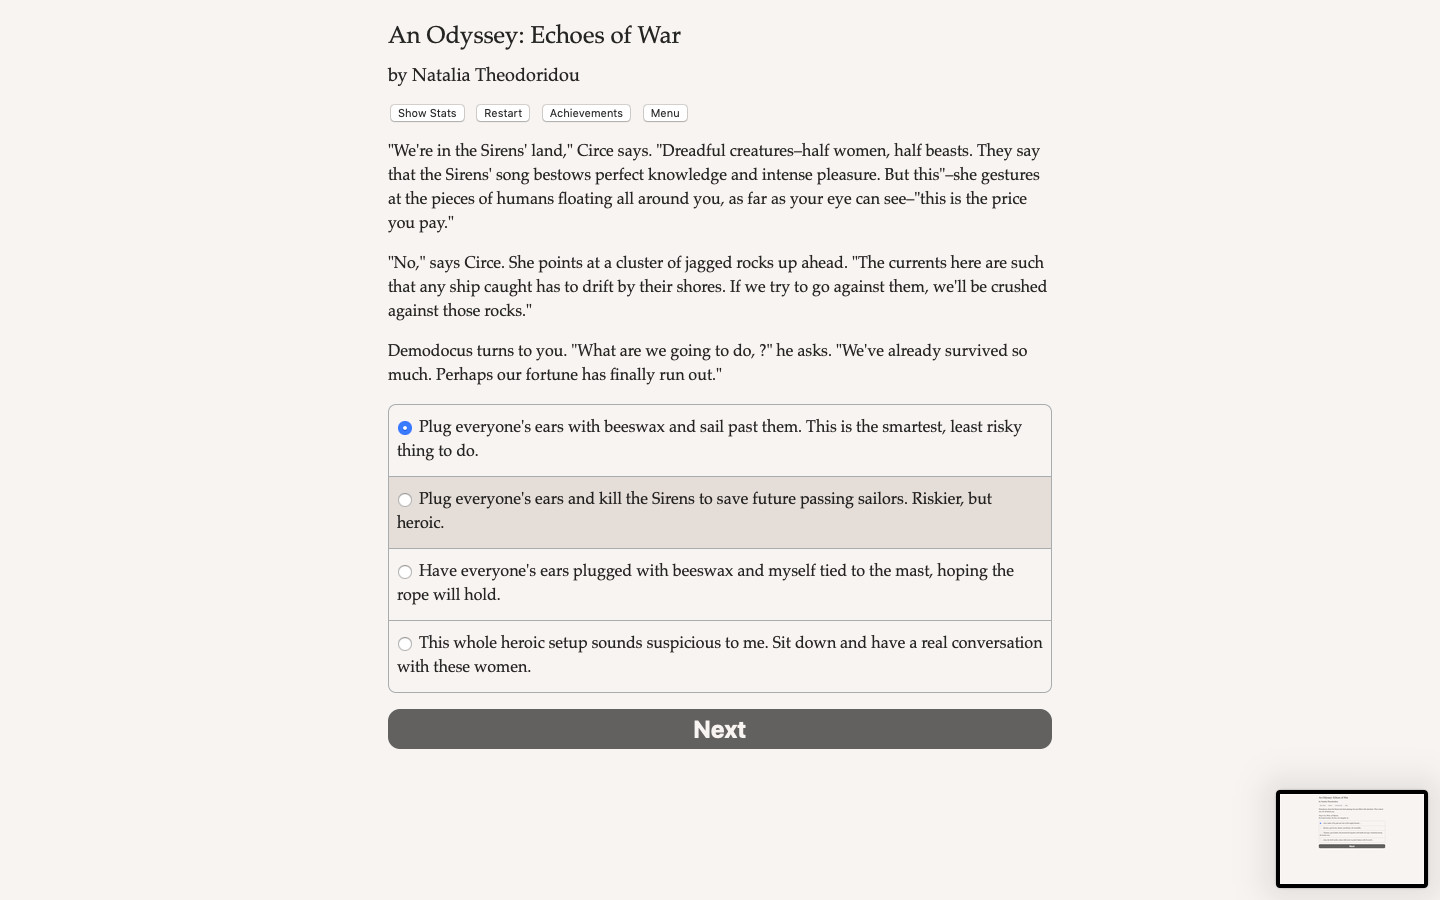 An Odyssey: Echoes of War Free Download